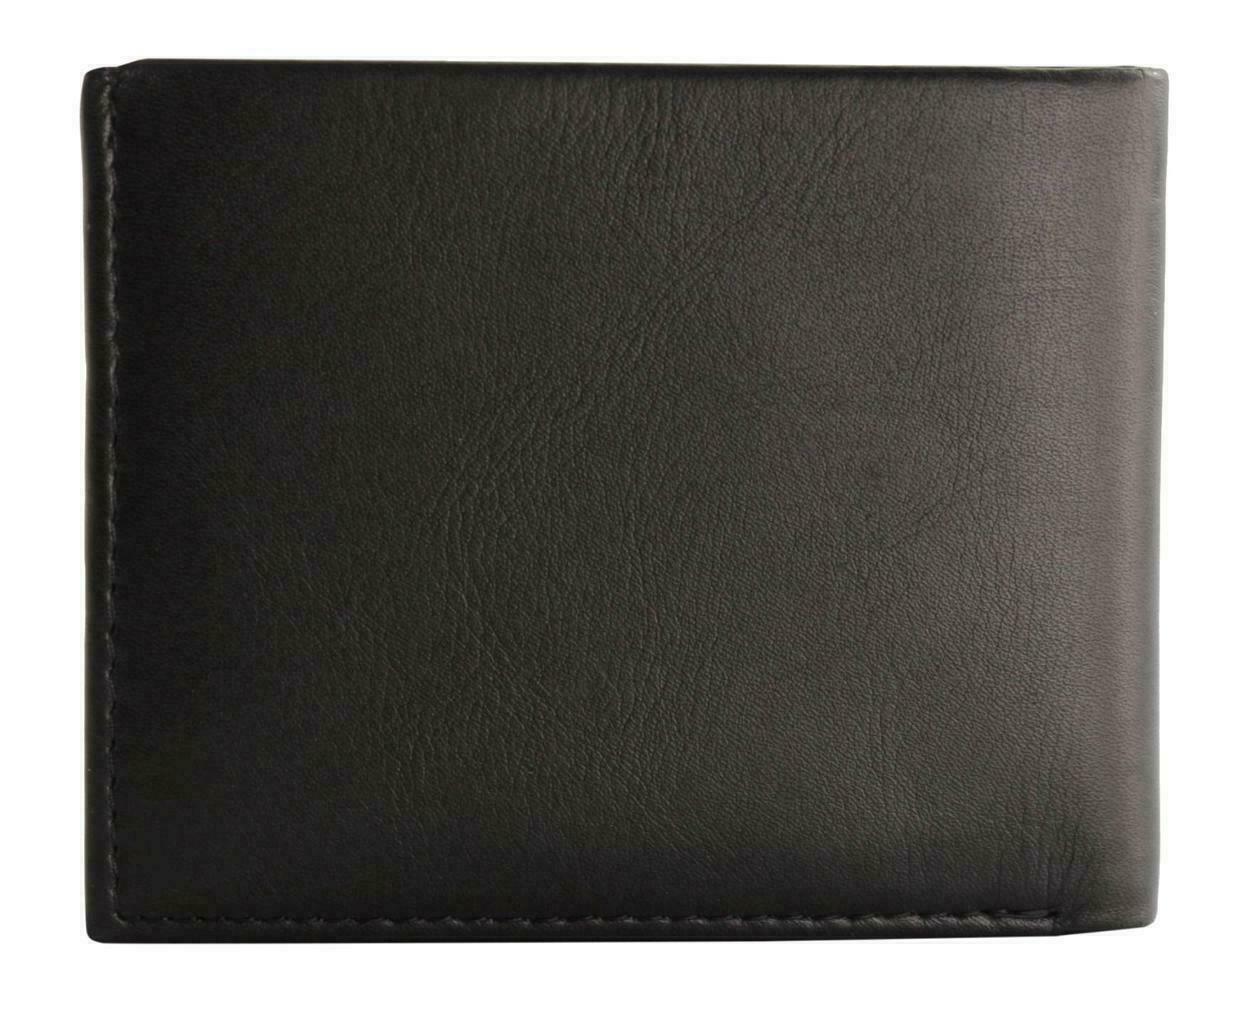 Original Mens Guess Wallet in black, Men's Fashion, Watches